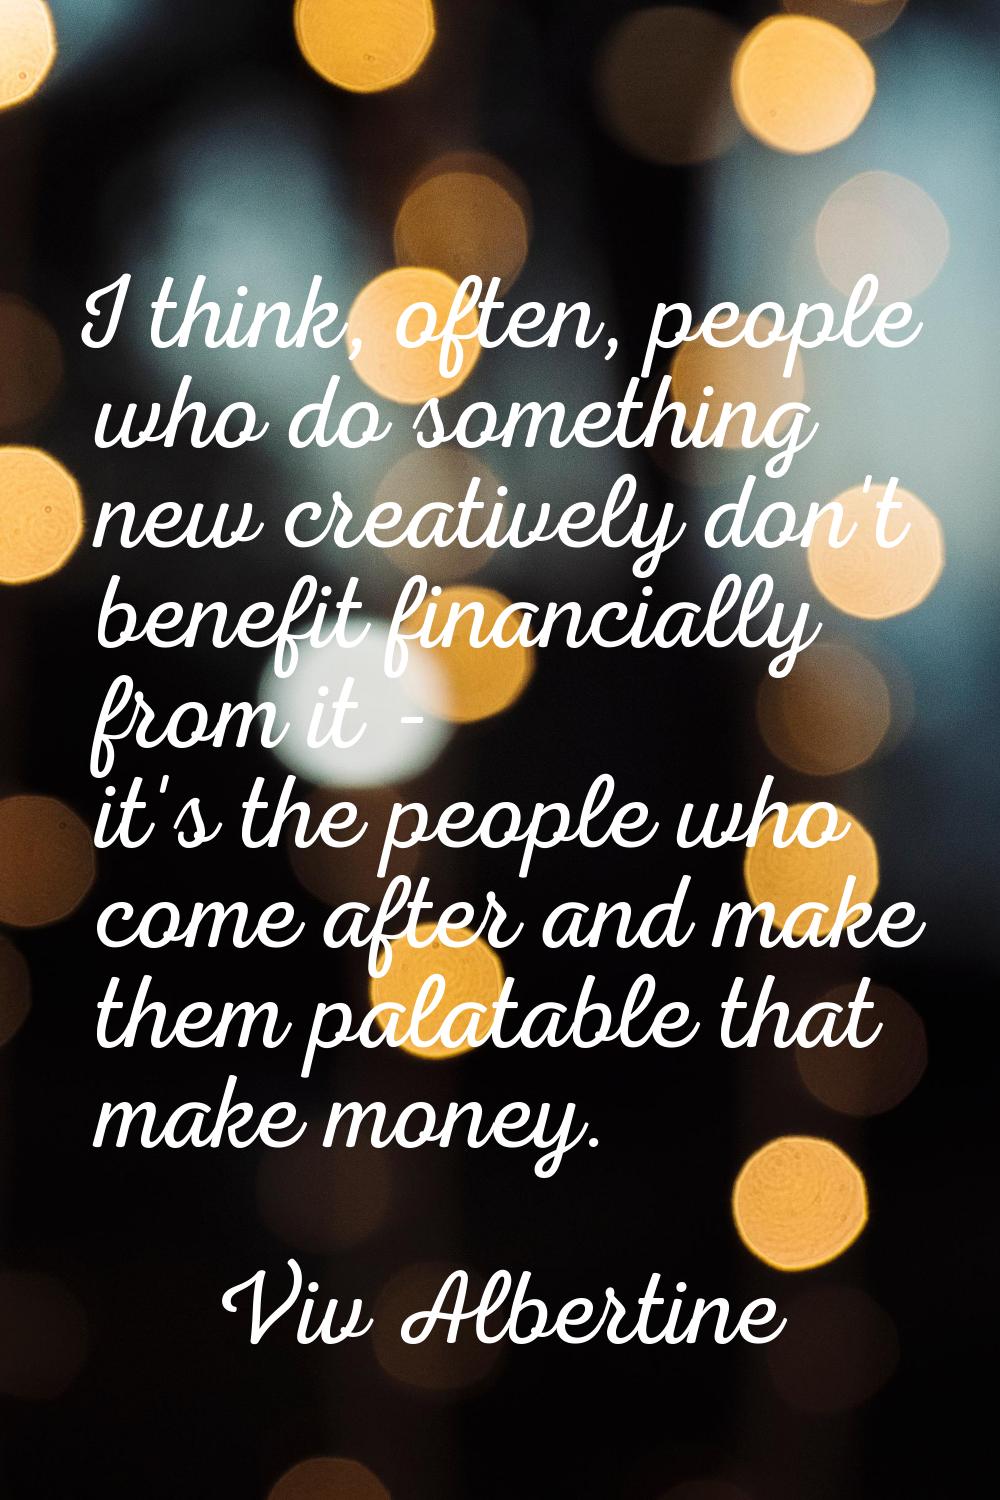 I think, often, people who do something new creatively don't benefit financially from it - it's the